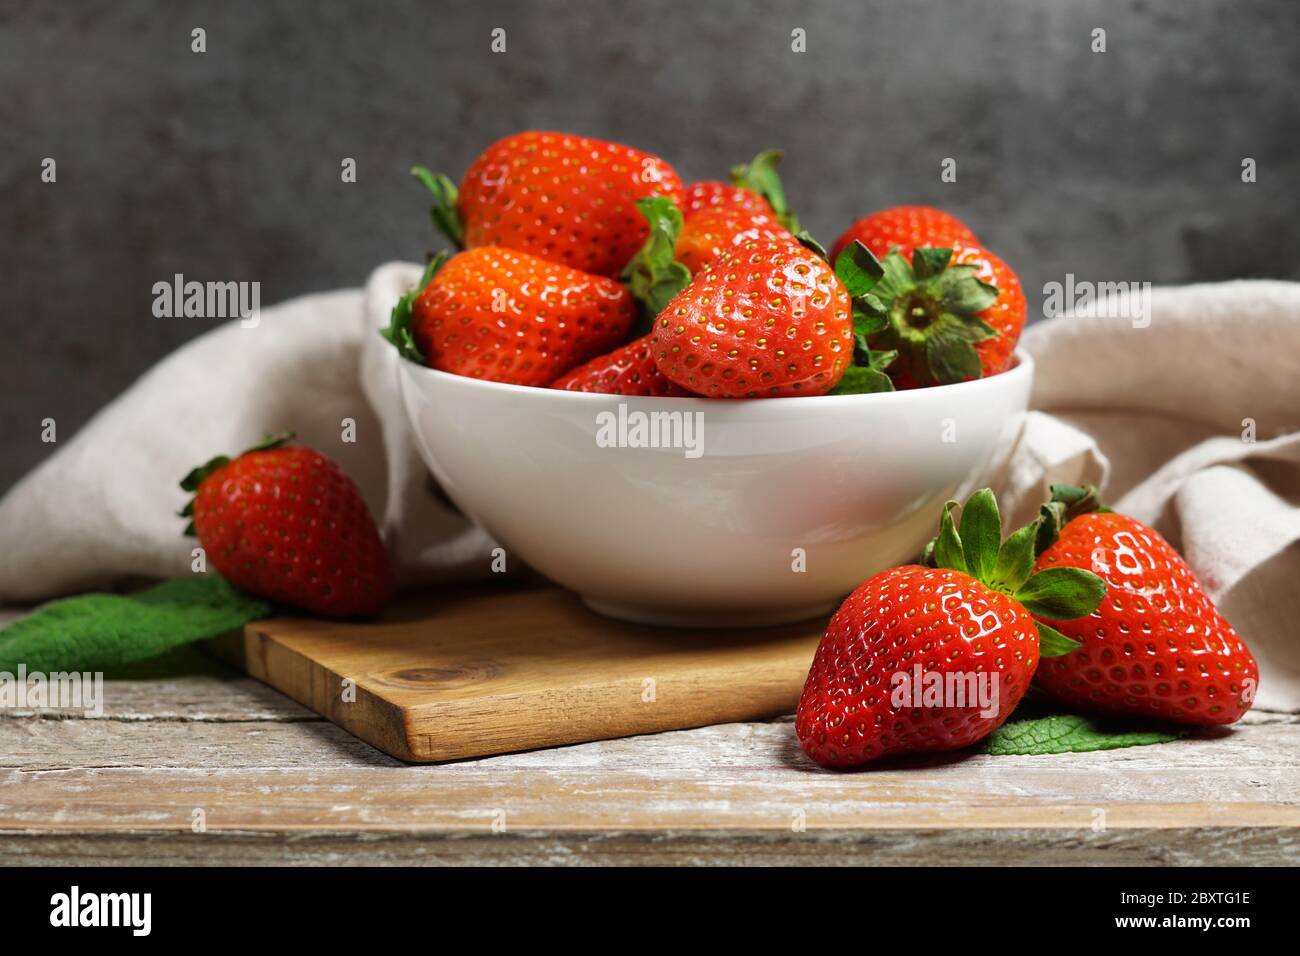 Strawberry concept with a group of ripe red strawberries in a white bowl close up frontal view on a vintage rustic wooden table and grey background. Stock Photo